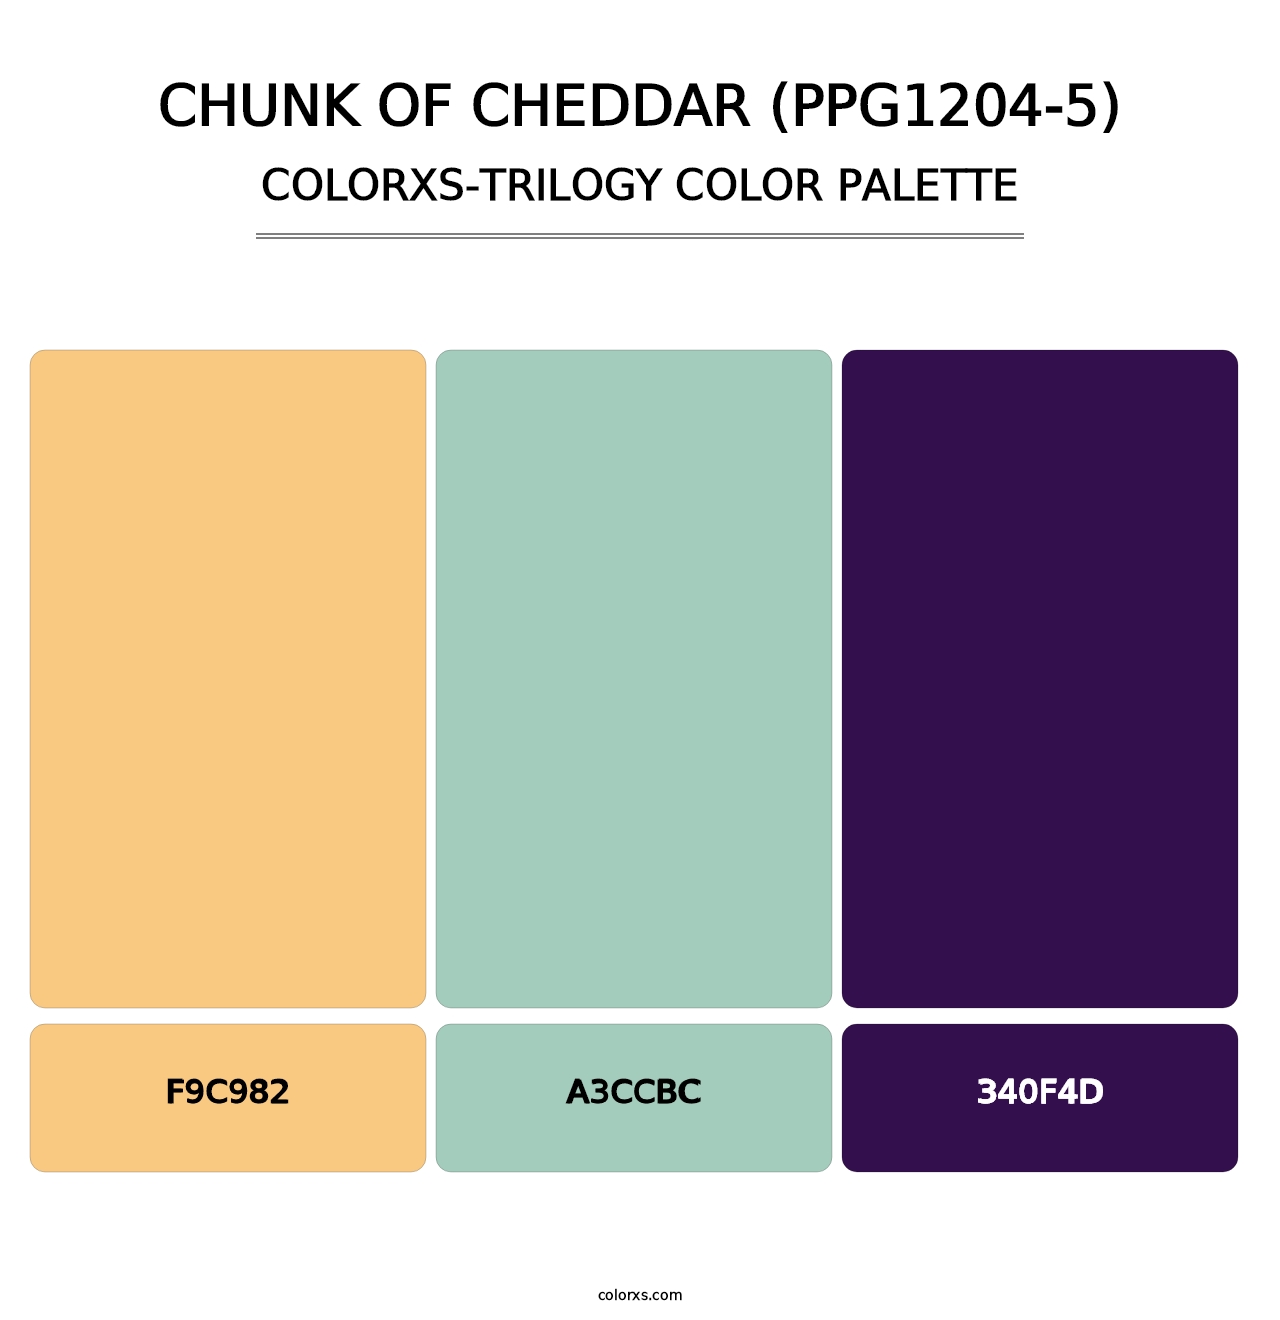 Chunk Of Cheddar (PPG1204-5) - Colorxs Trilogy Palette